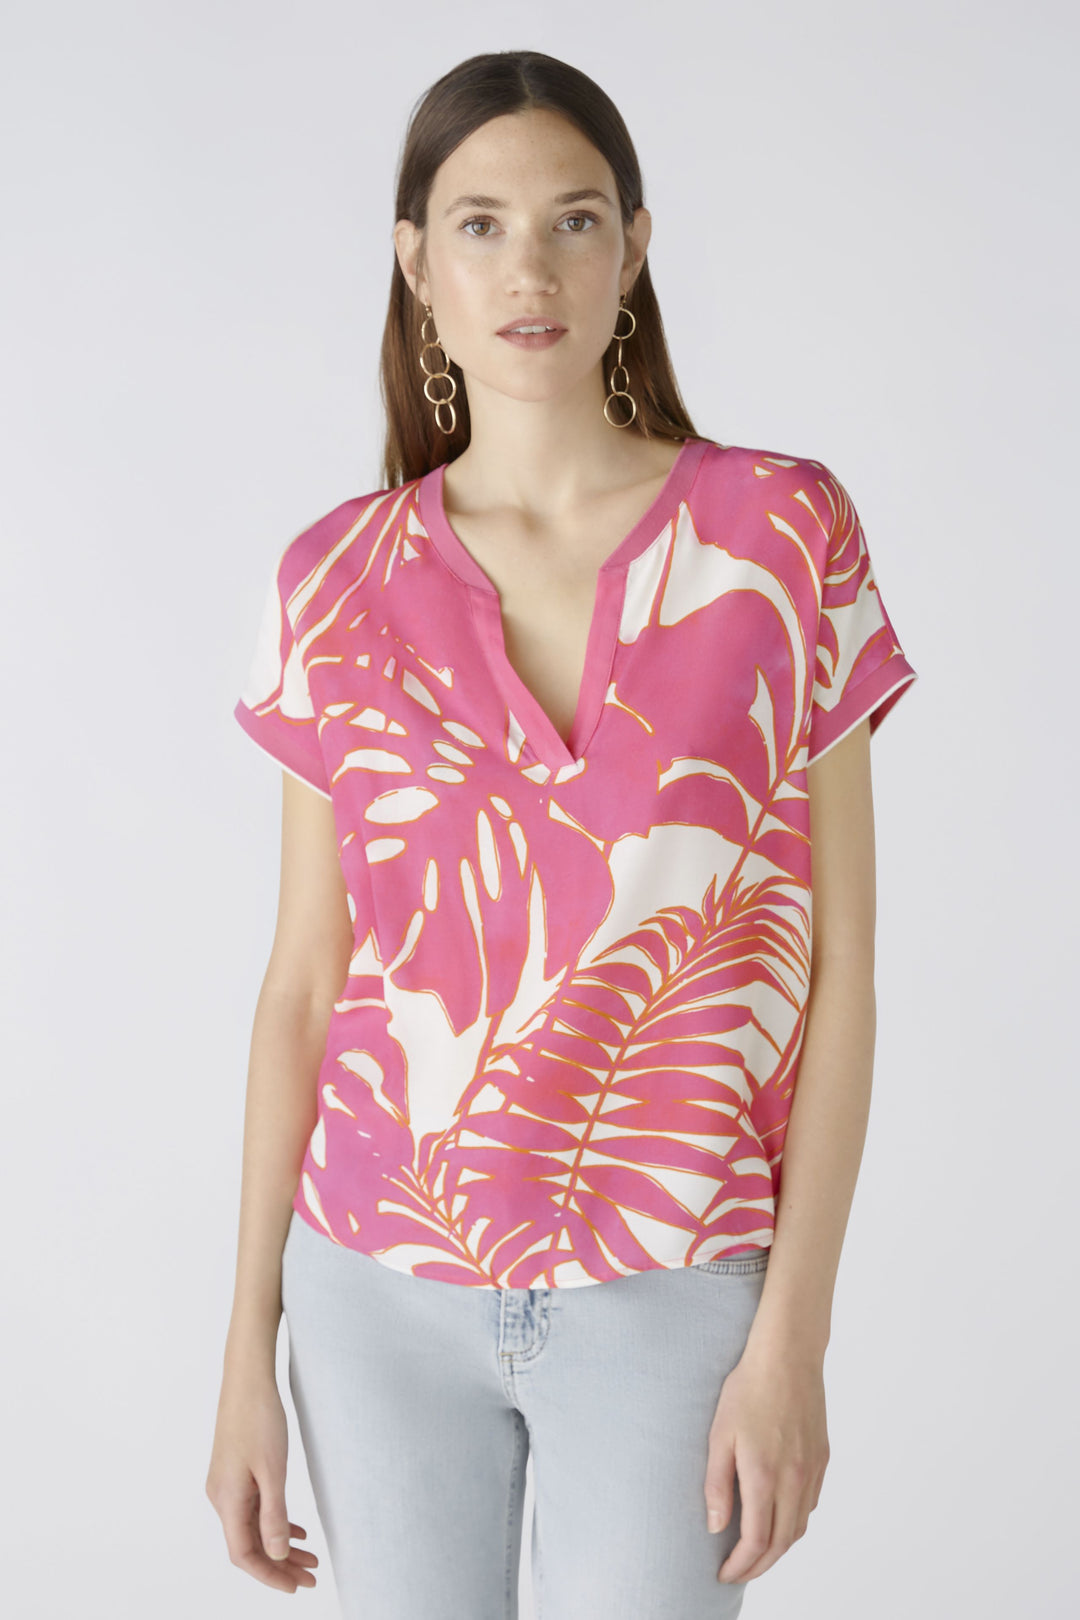 Oui Short Sleeve Floral Blouse In Pink & White